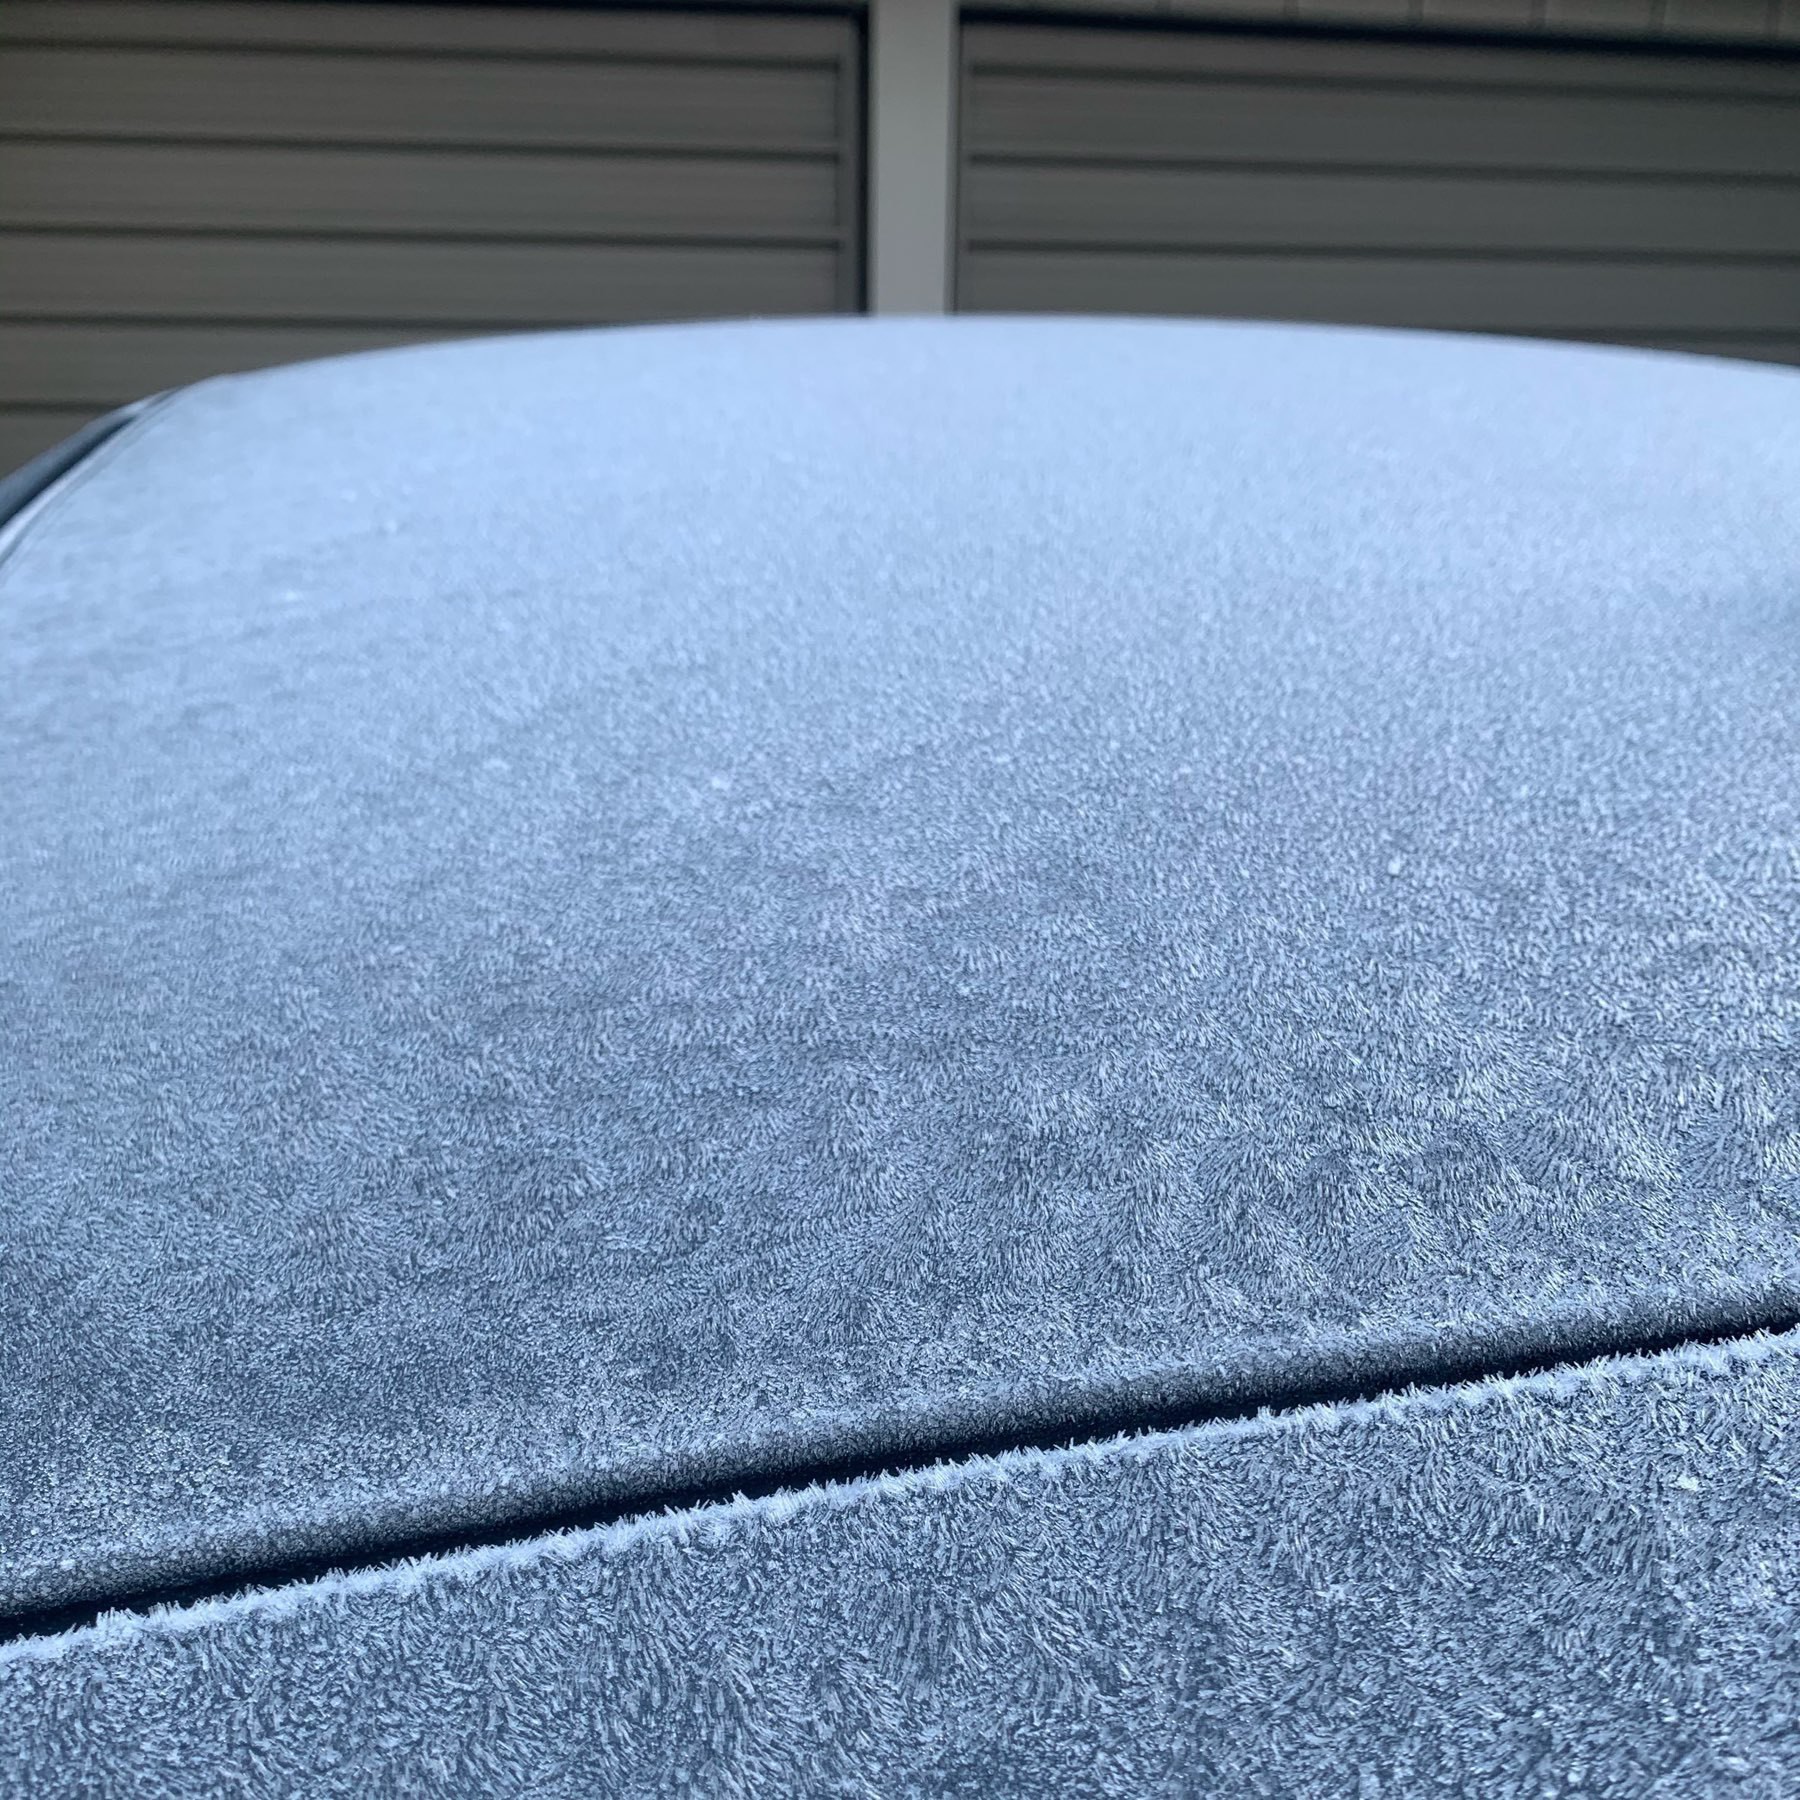 Our car with frost on the roof